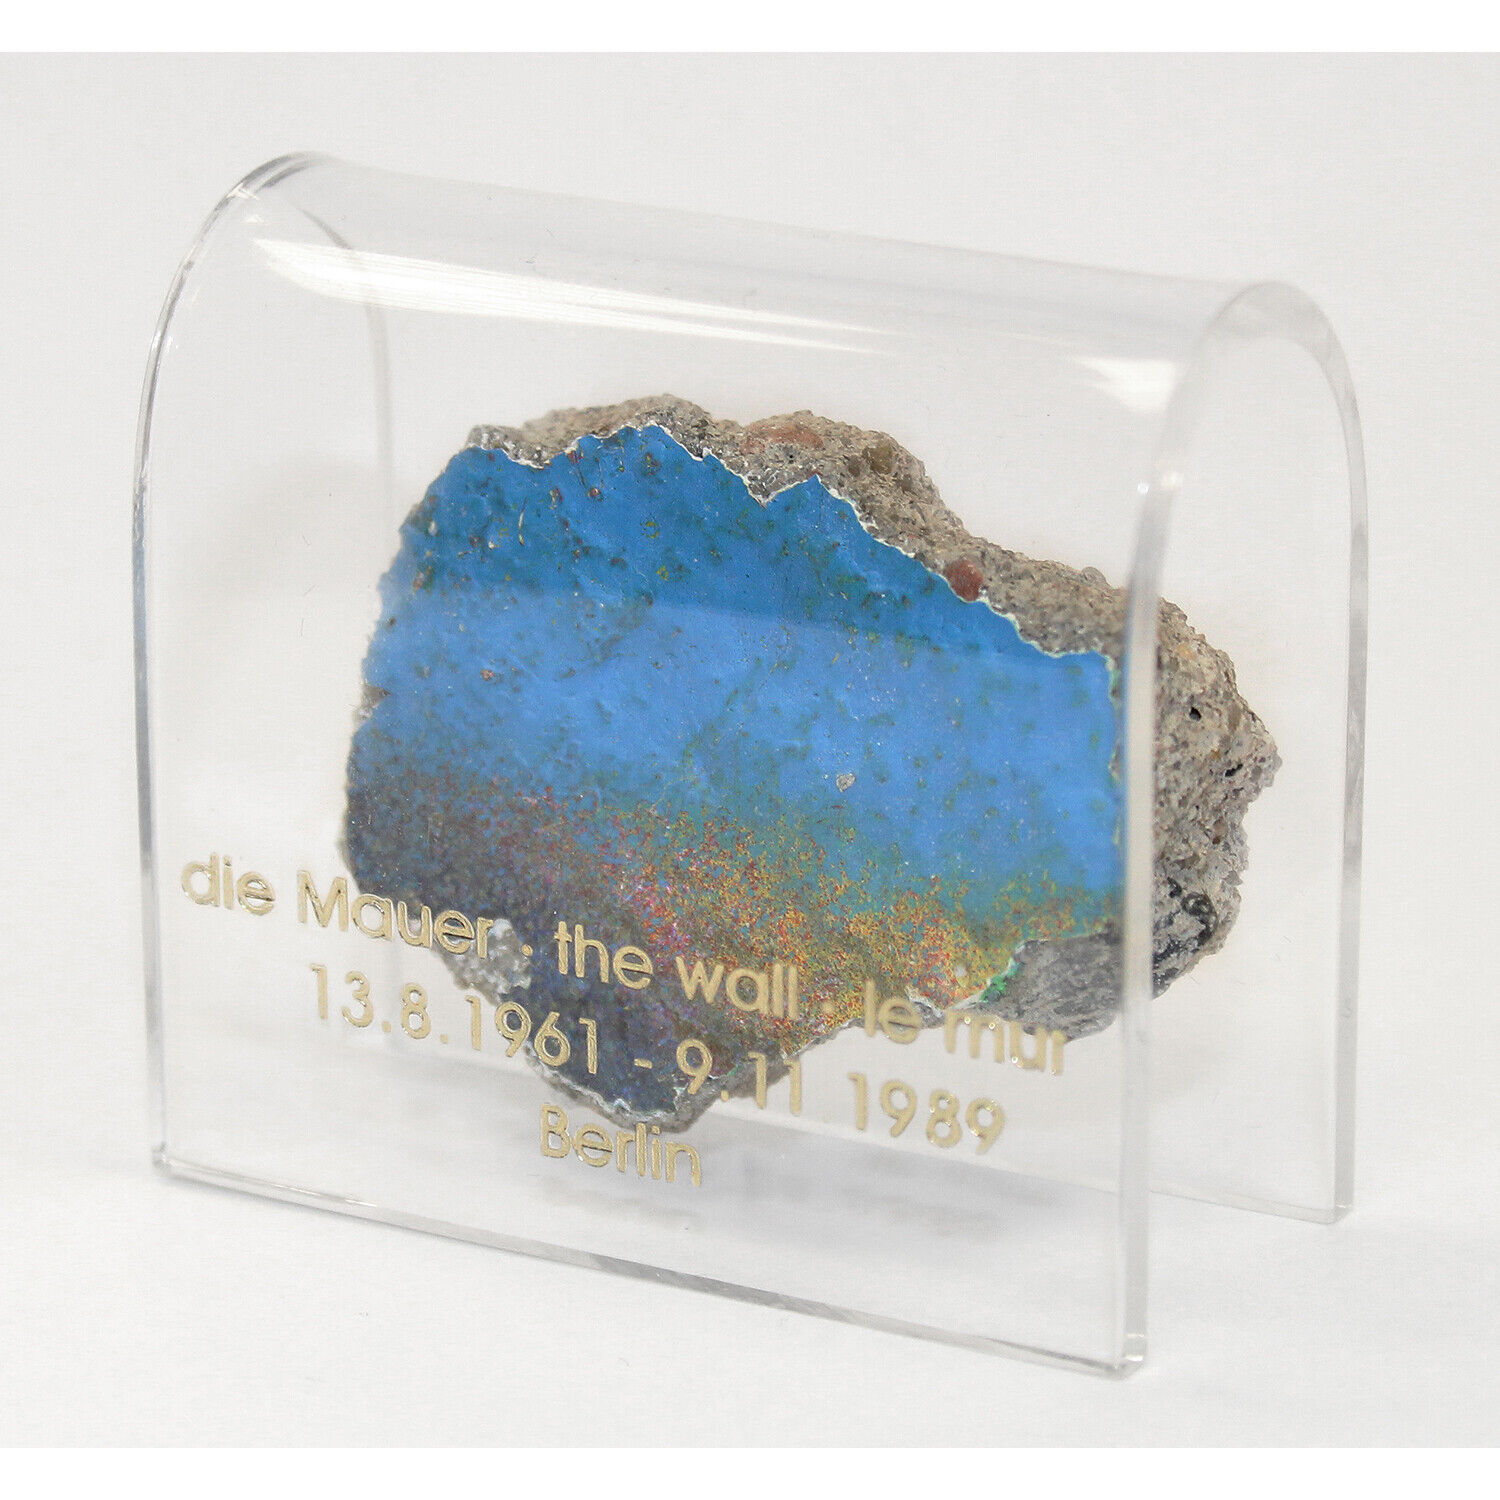 Historical Genuine Piece of the Berlin Wall in an Acrylic Display Various Sizes